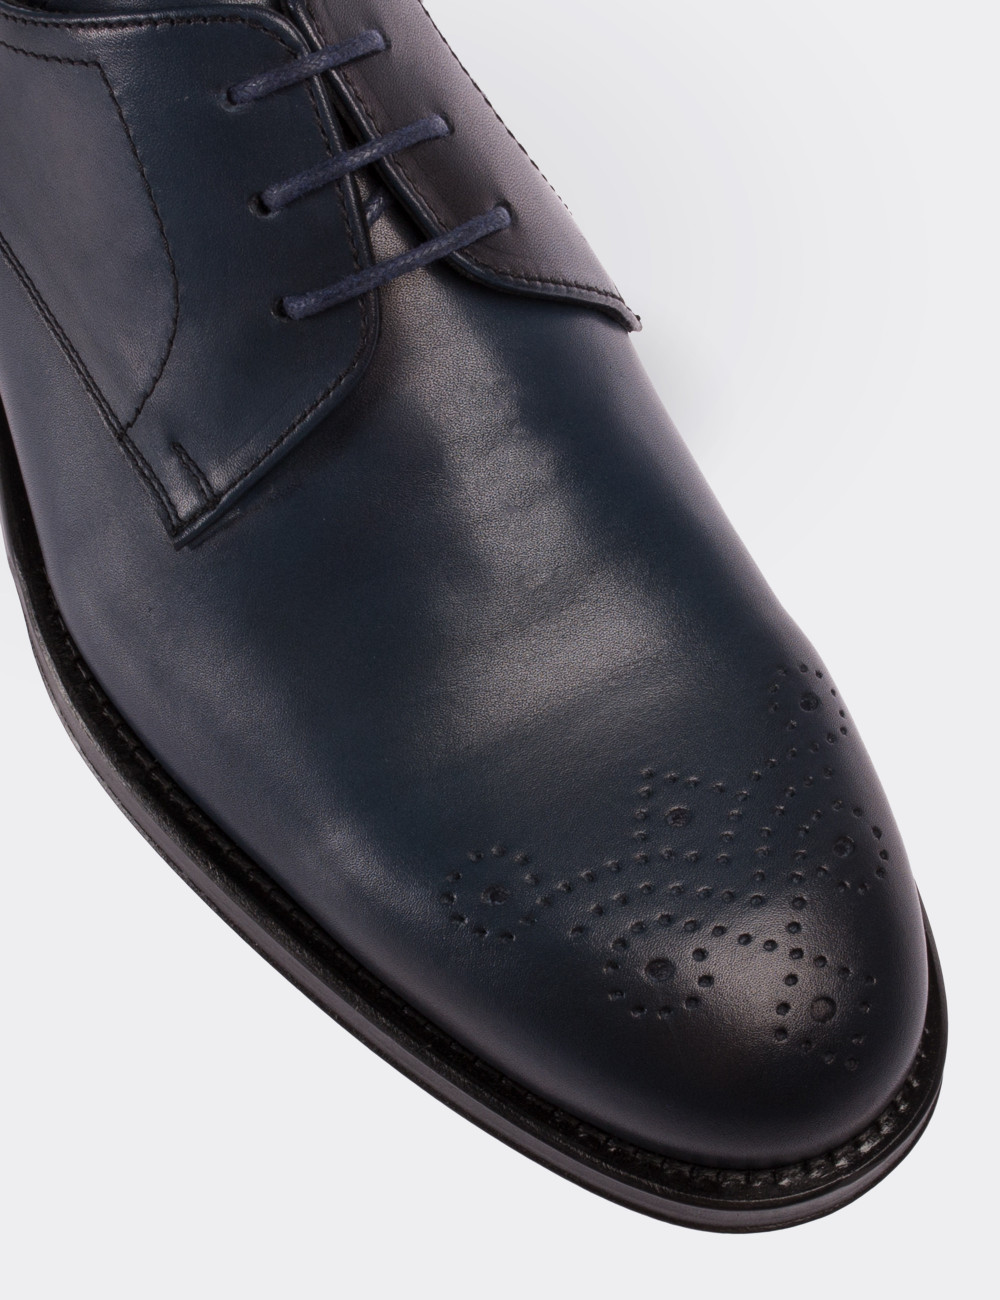 Navy  Leather Classic Shoes - 01604MLCVK01